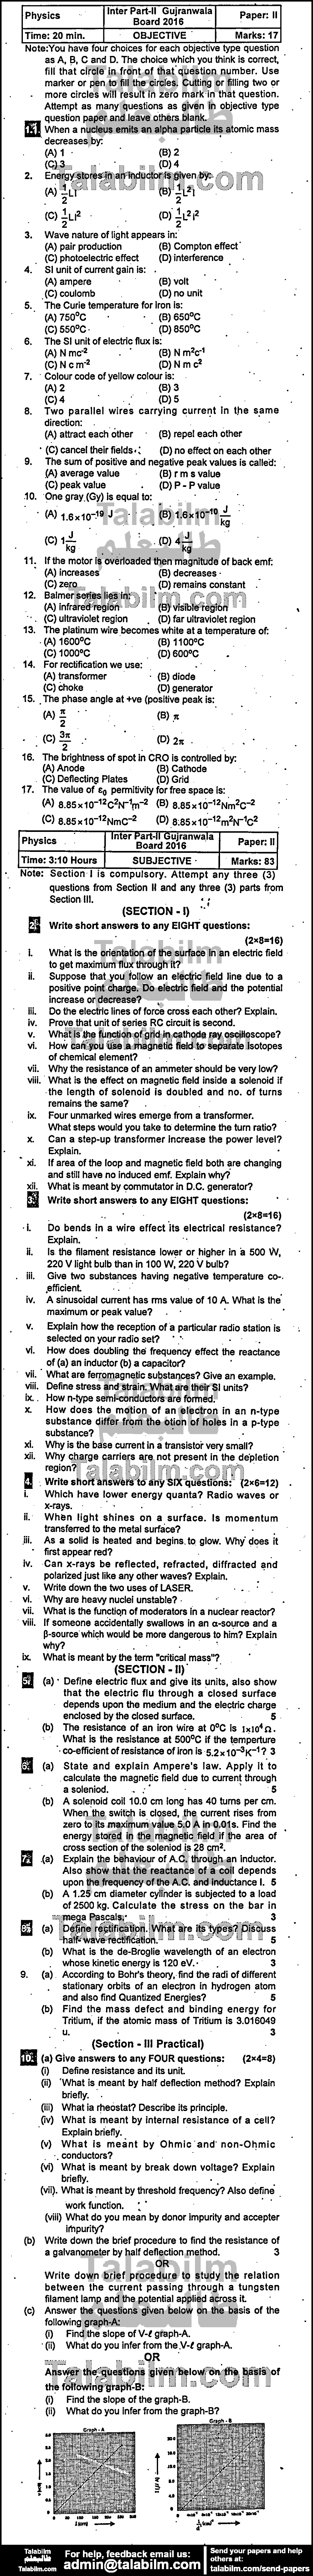 Physics 0 past paper for Group-I 2016